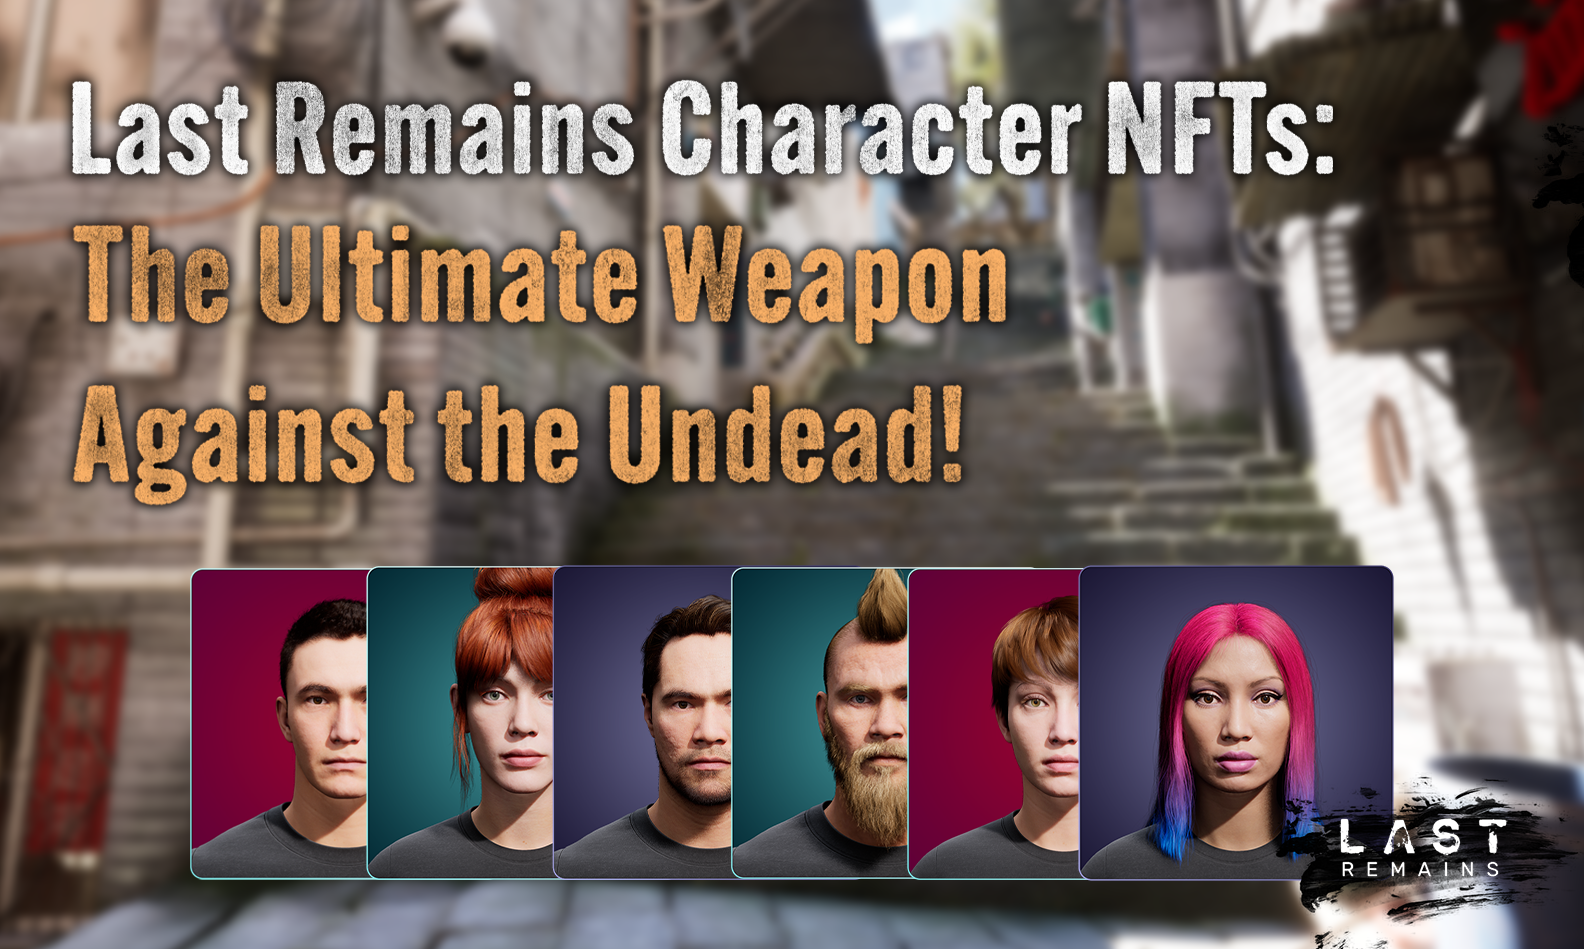 Last Remains Character NFTs: The Ultimate Weapon Against the Undead!